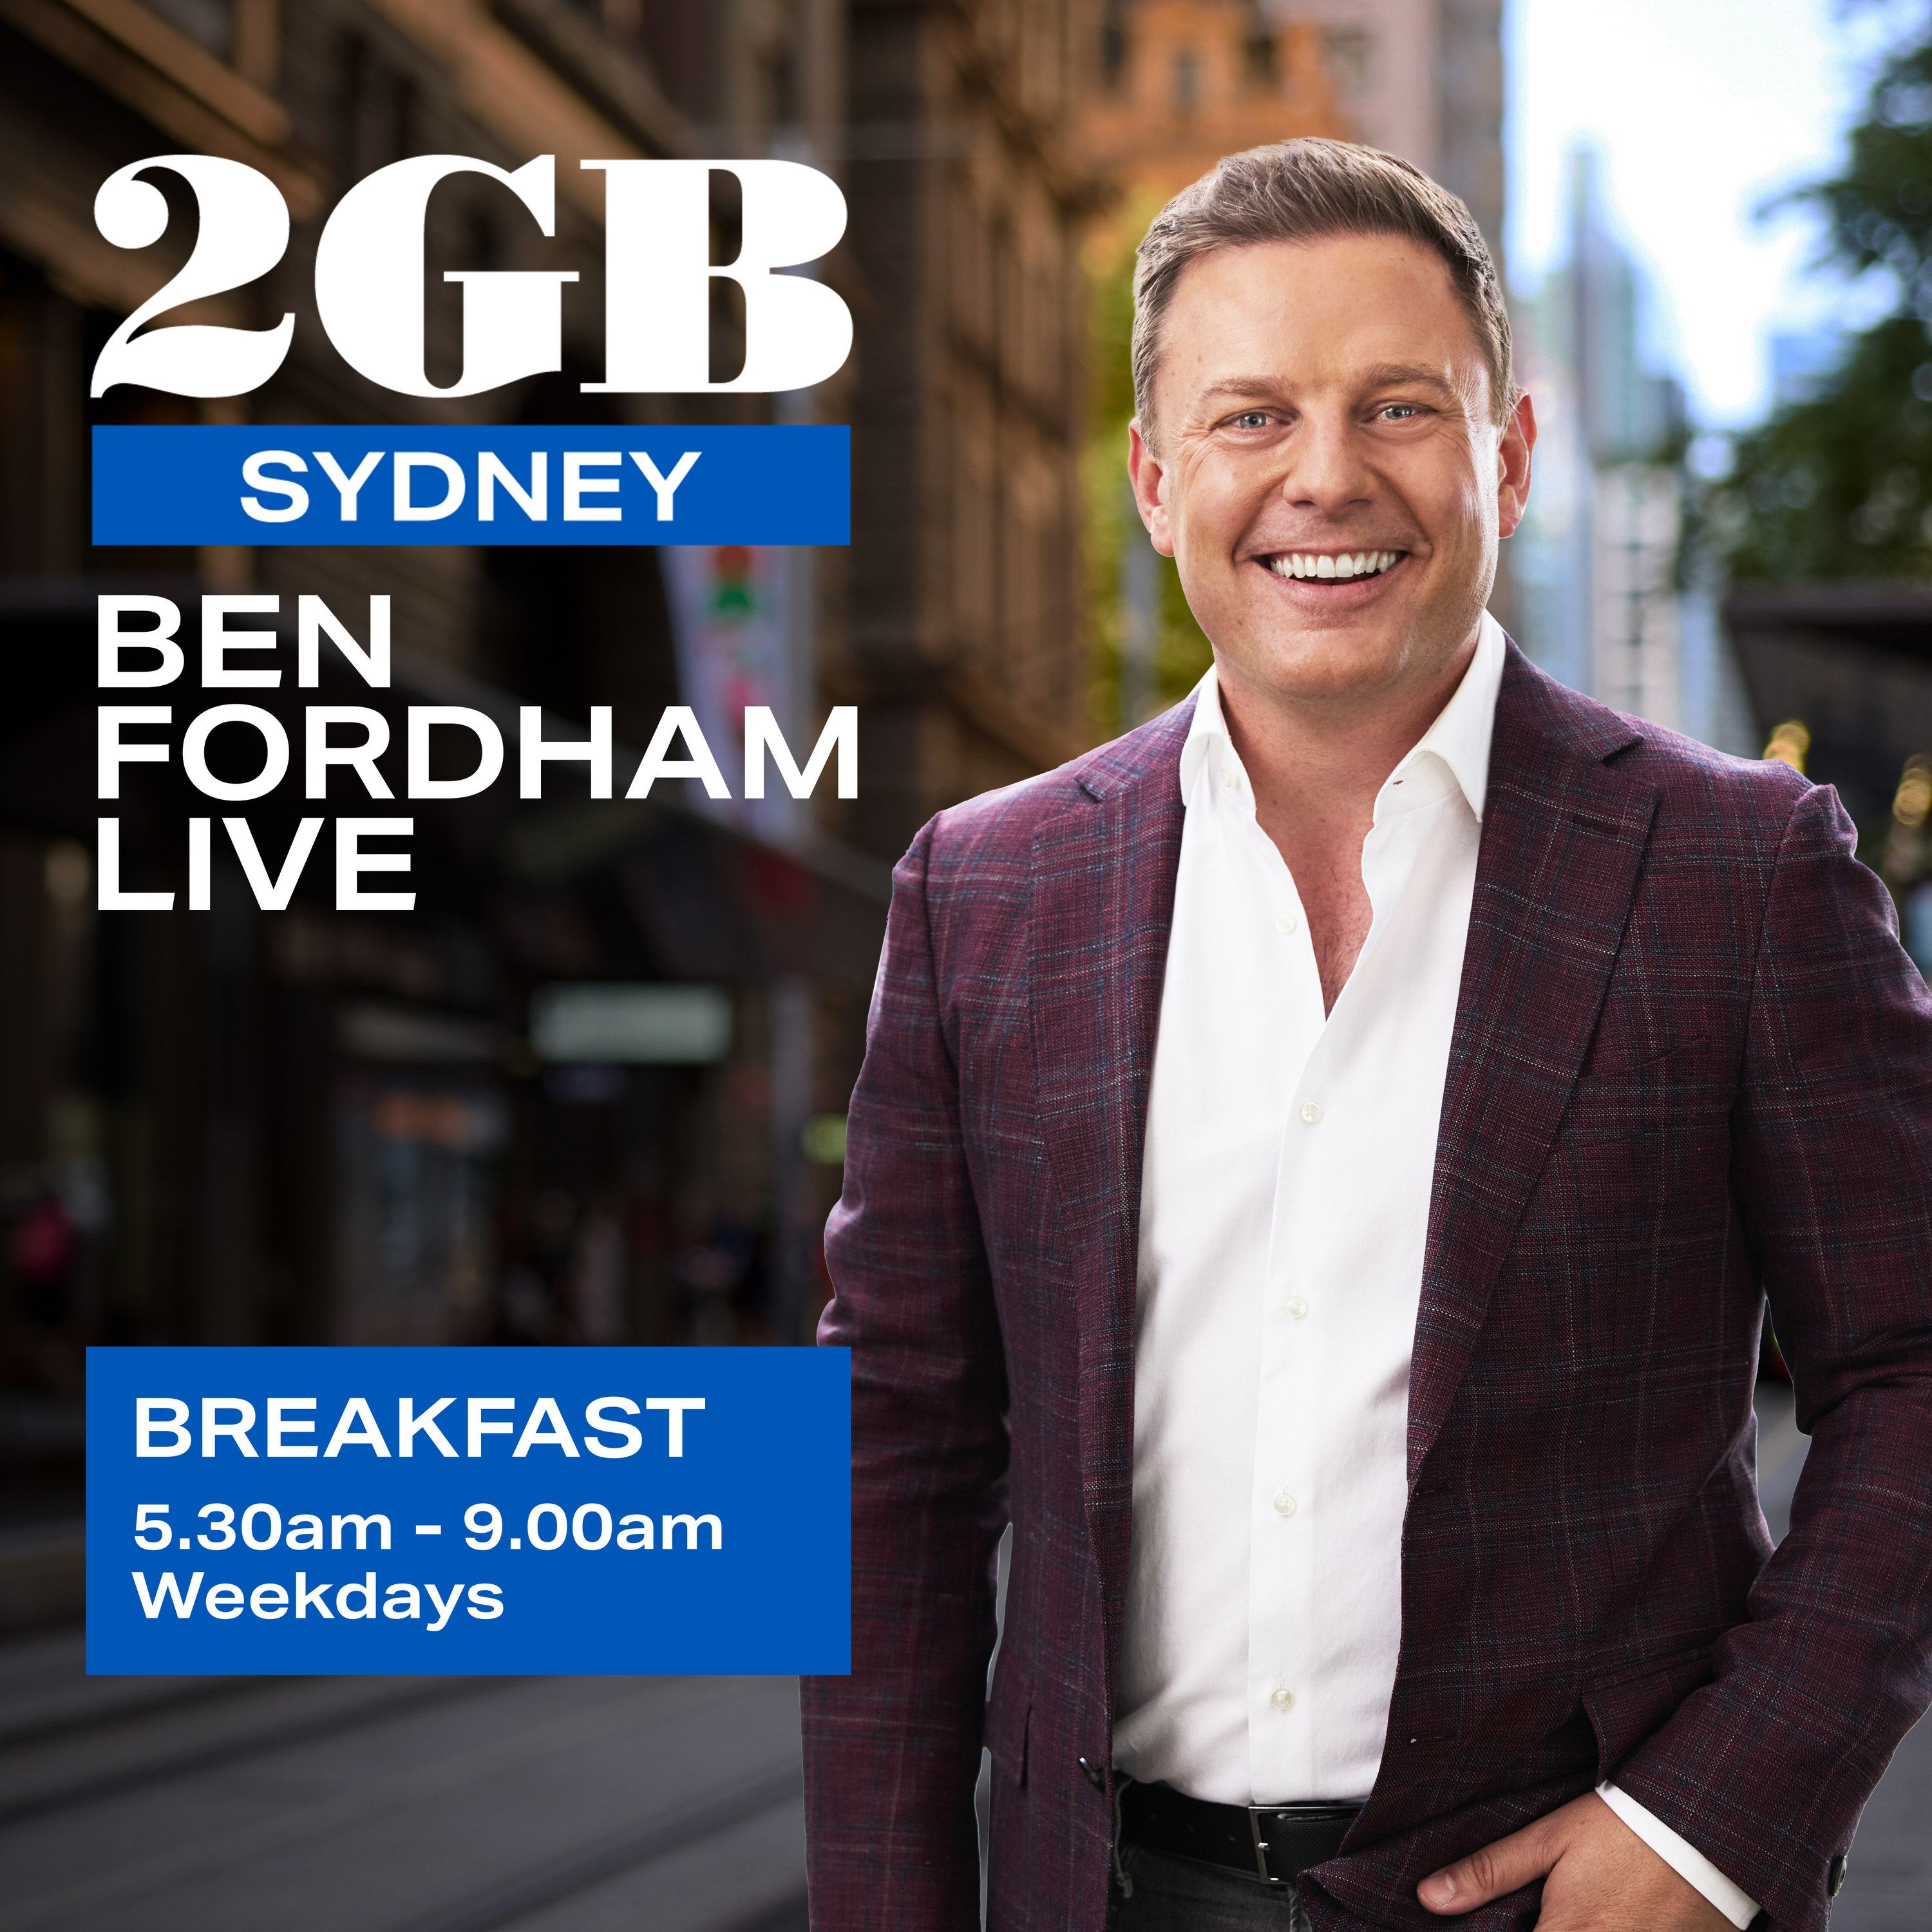 Ben Fordham's fight against land clearing laws